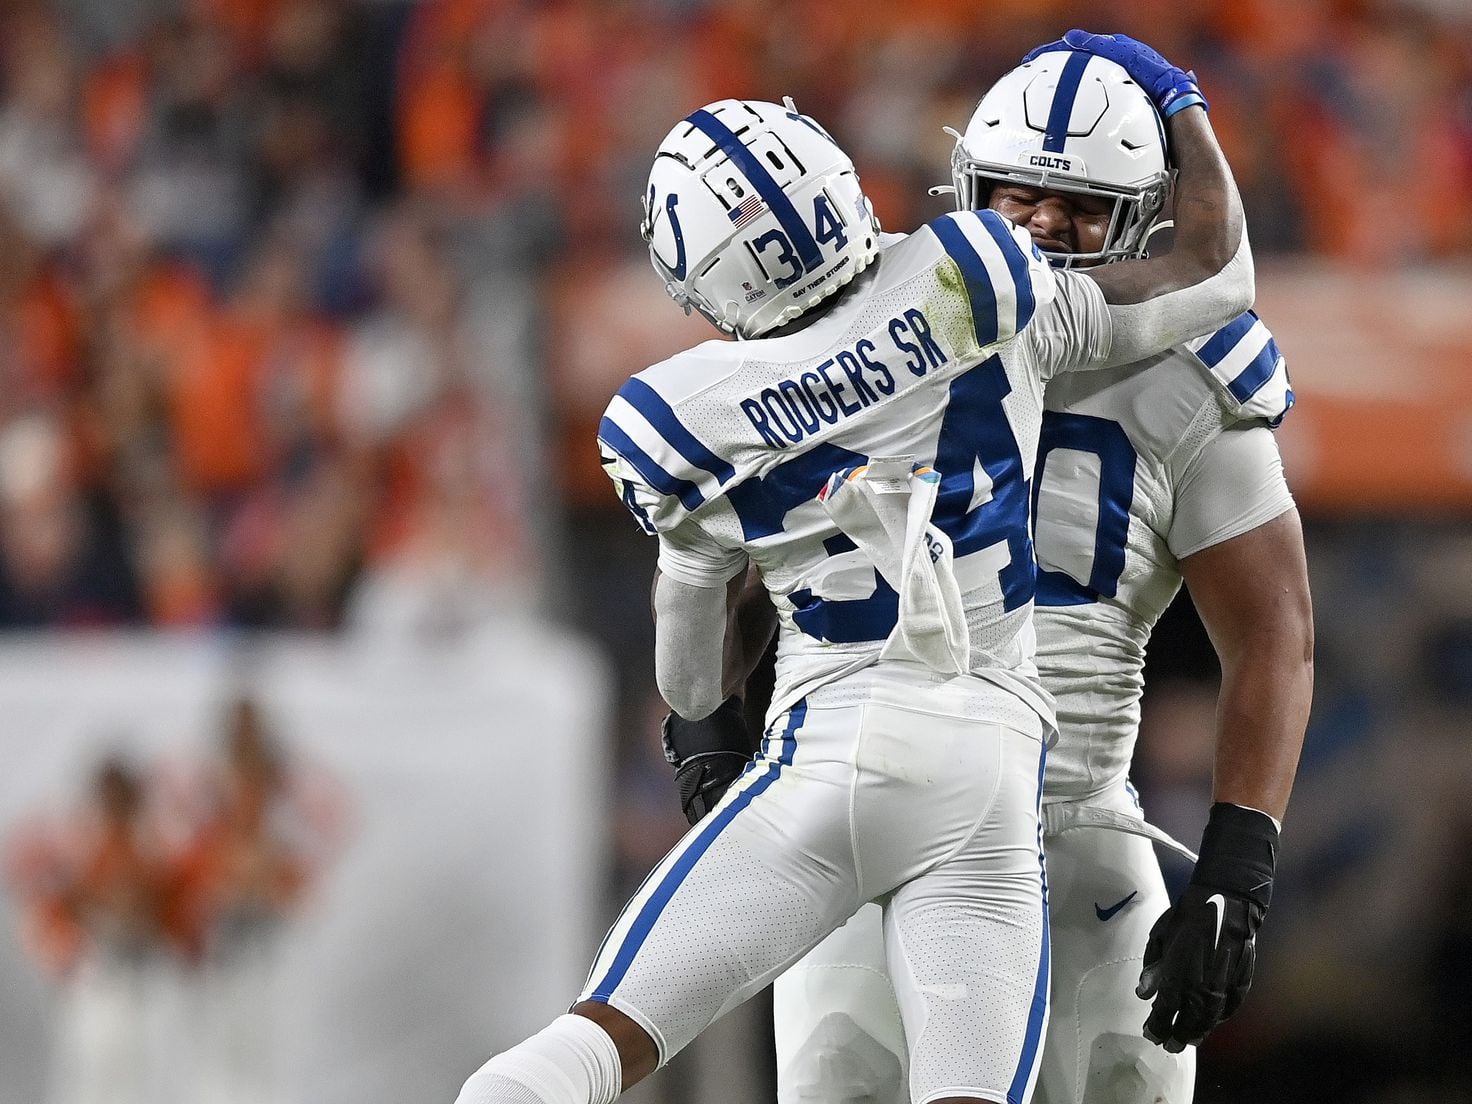 Indianapolis Colts 12 vs 9 Denver Broncos summary: stats, and highlights